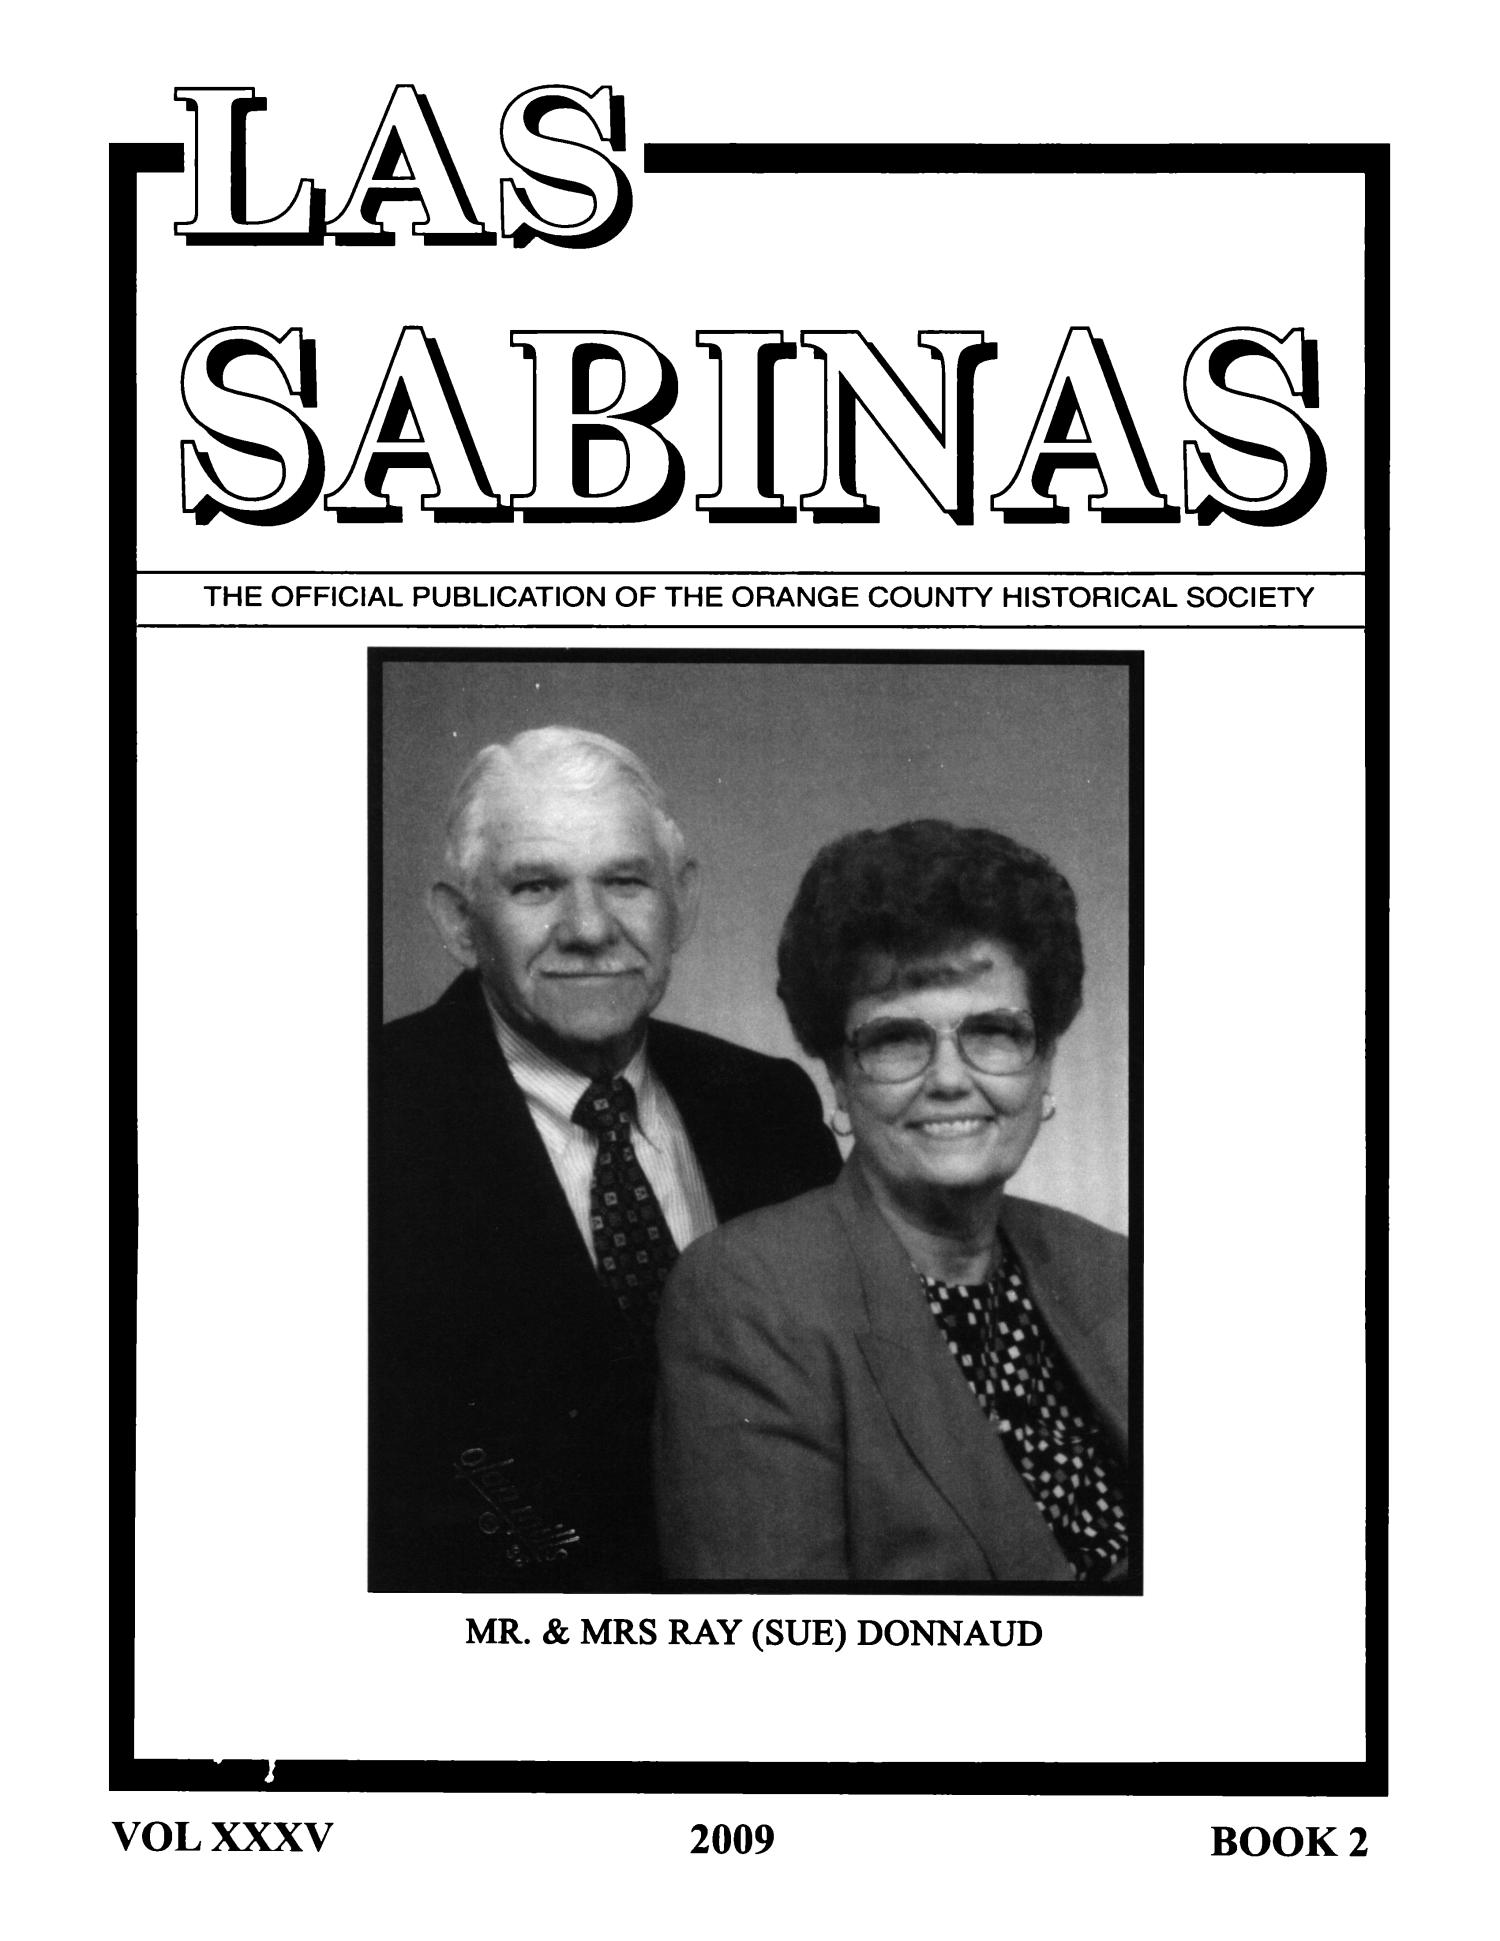 Las Sabinas, Volume 35, Number 2, 2009
                                                
                                                    Front Cover
                                                